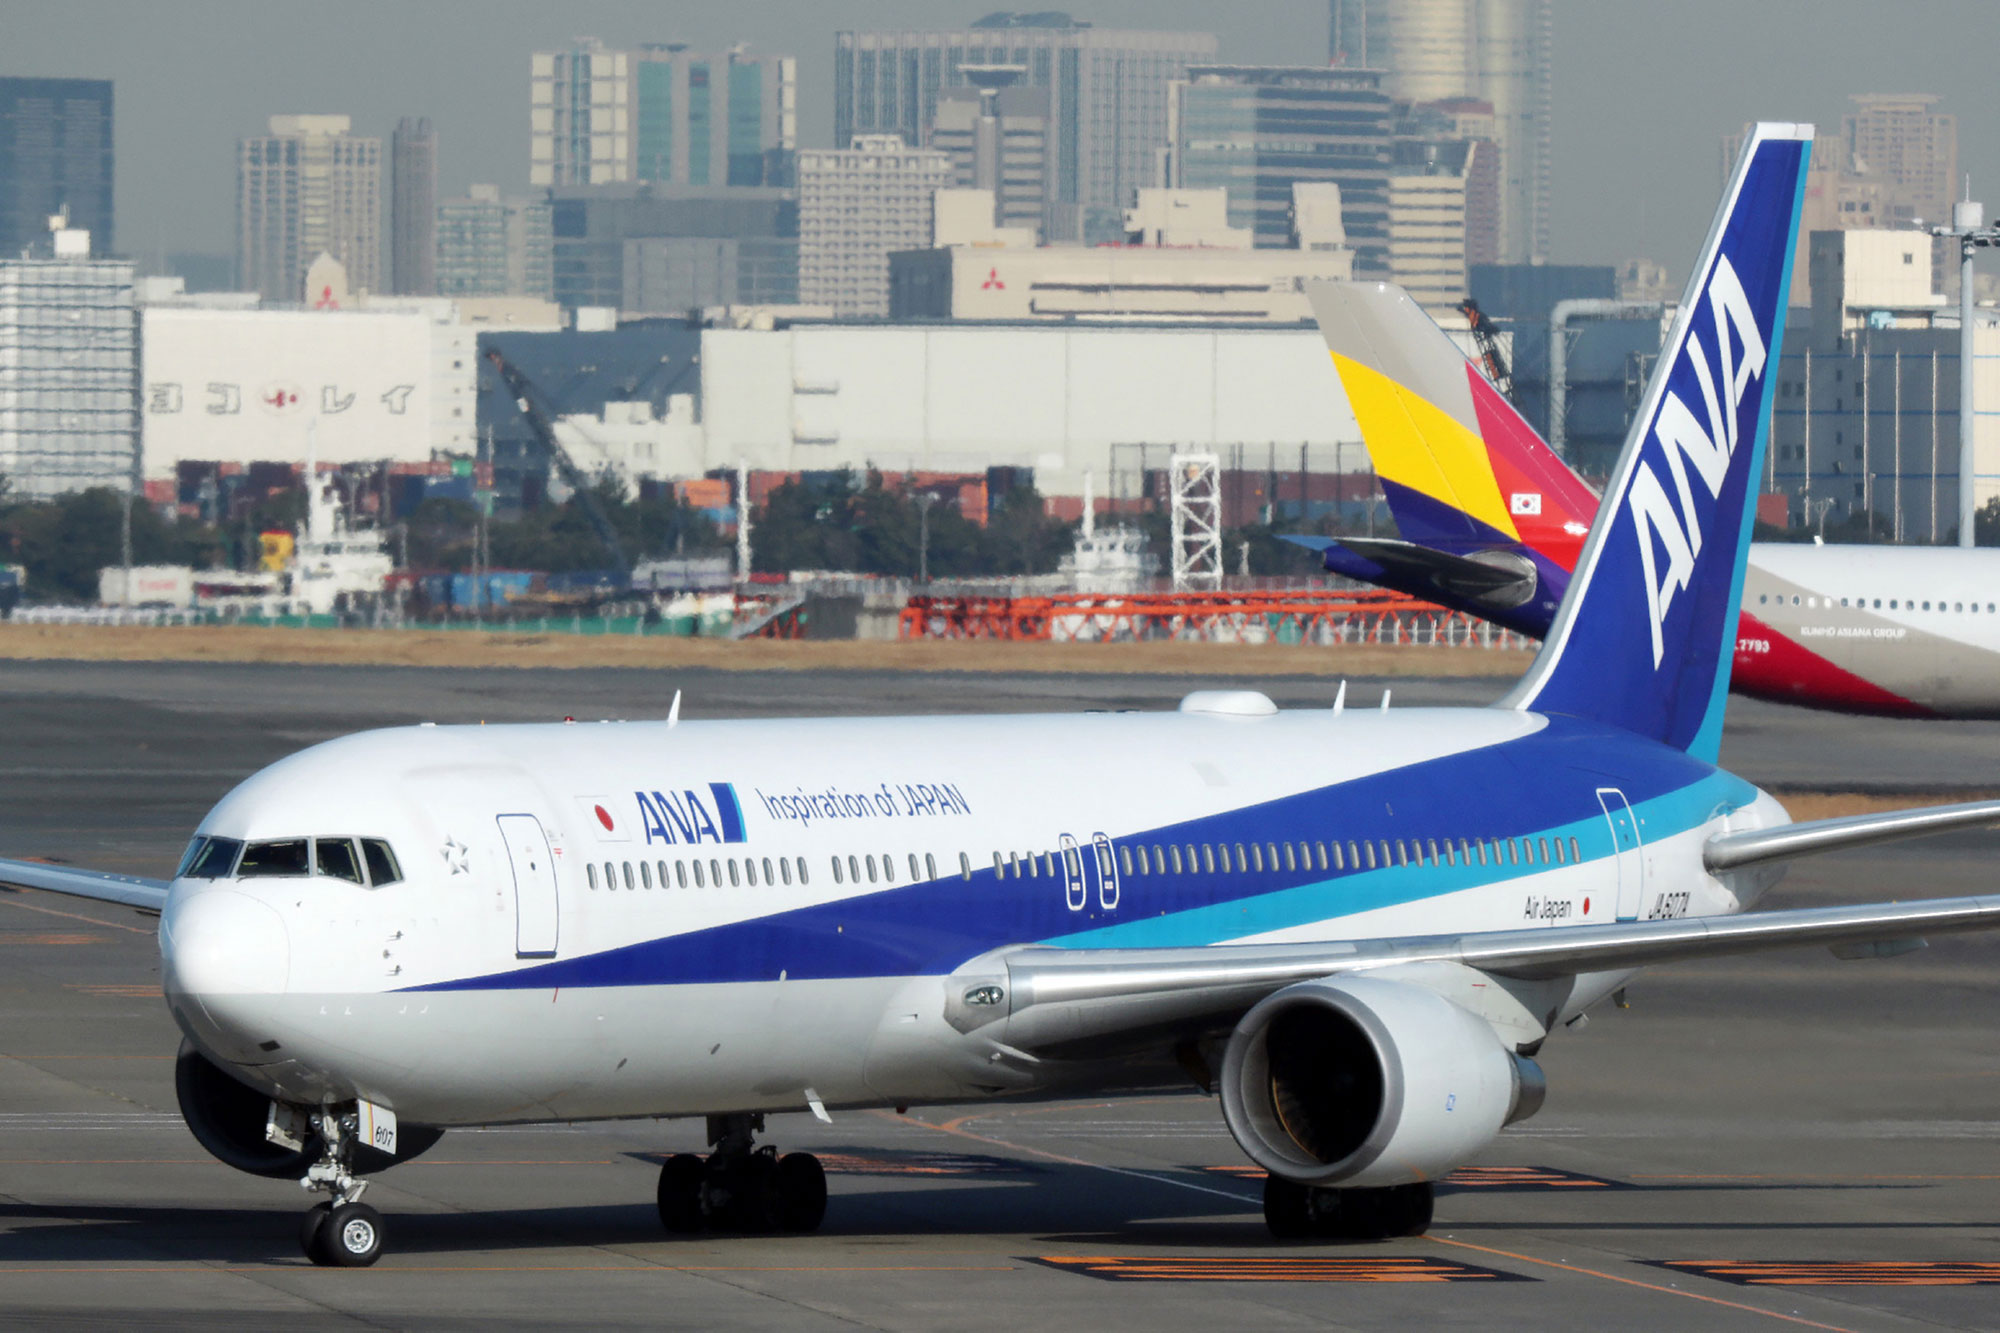 The second charter flight arranged to evacuate Japanese citizens from Wuhan lands at Haneda airport in Tokyo on January 30.